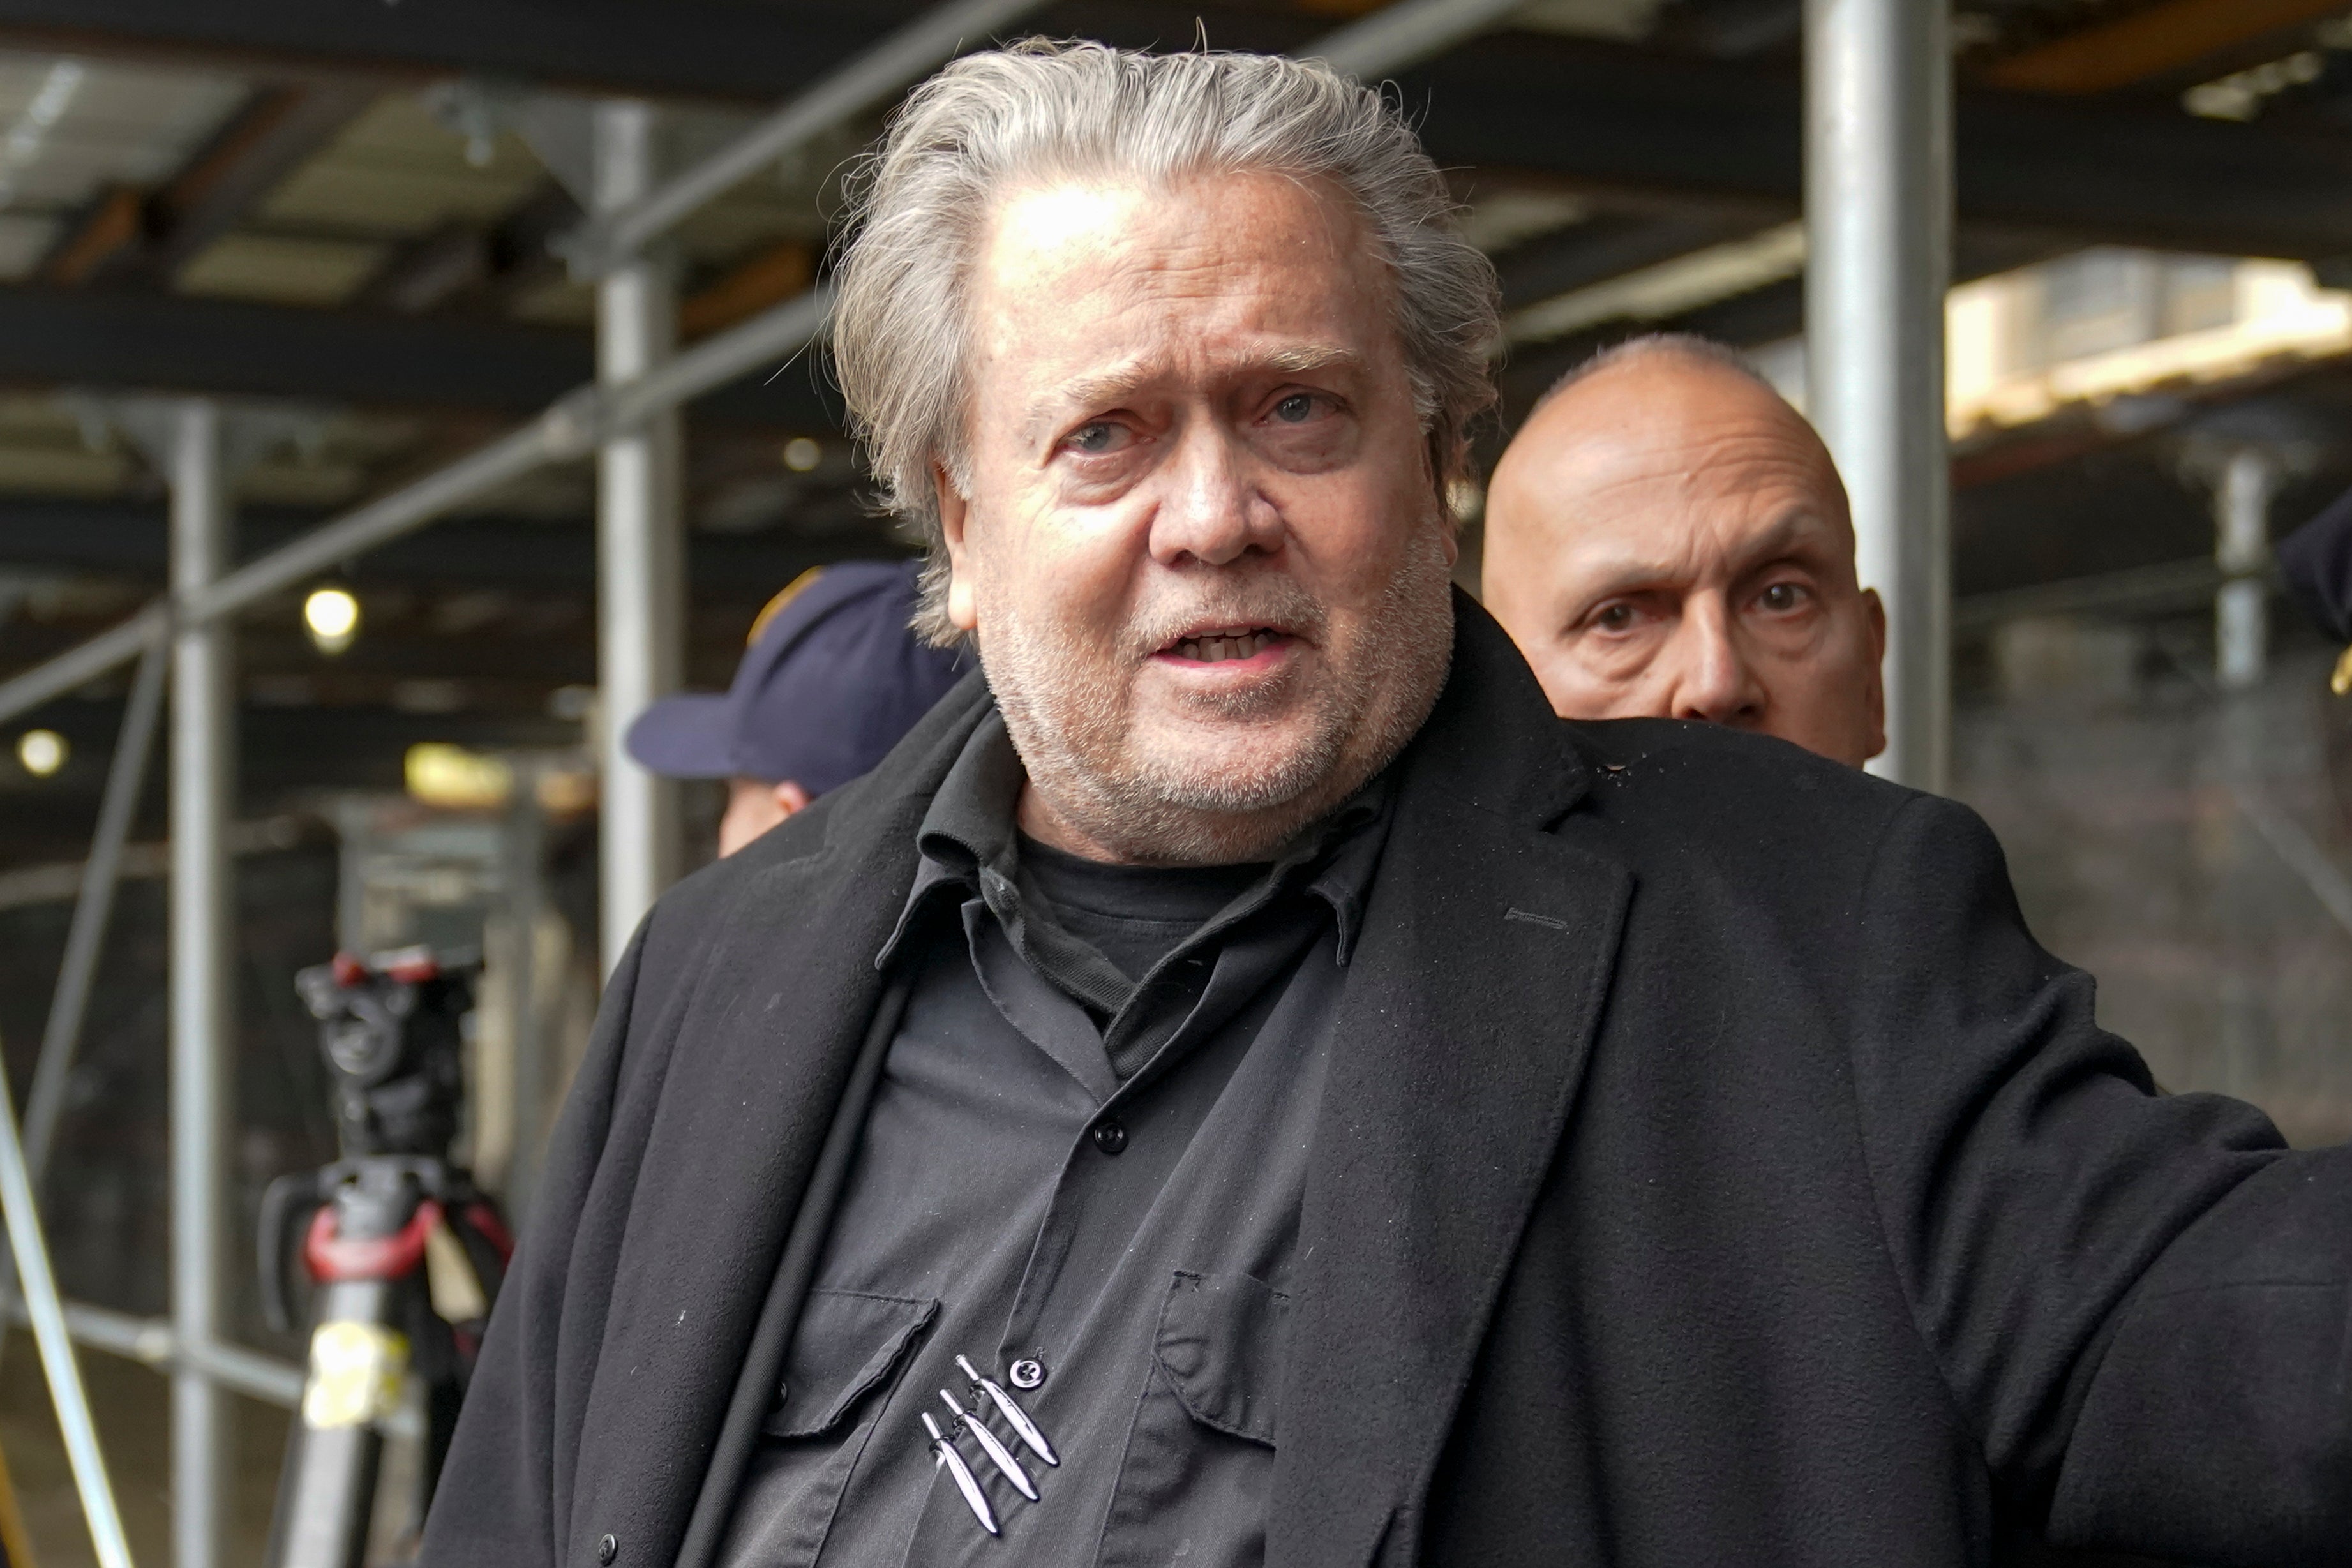 Steve Bannon has been subpoenaed by Smartmatic over its $2.7bn defamation lawsuit against Fox News